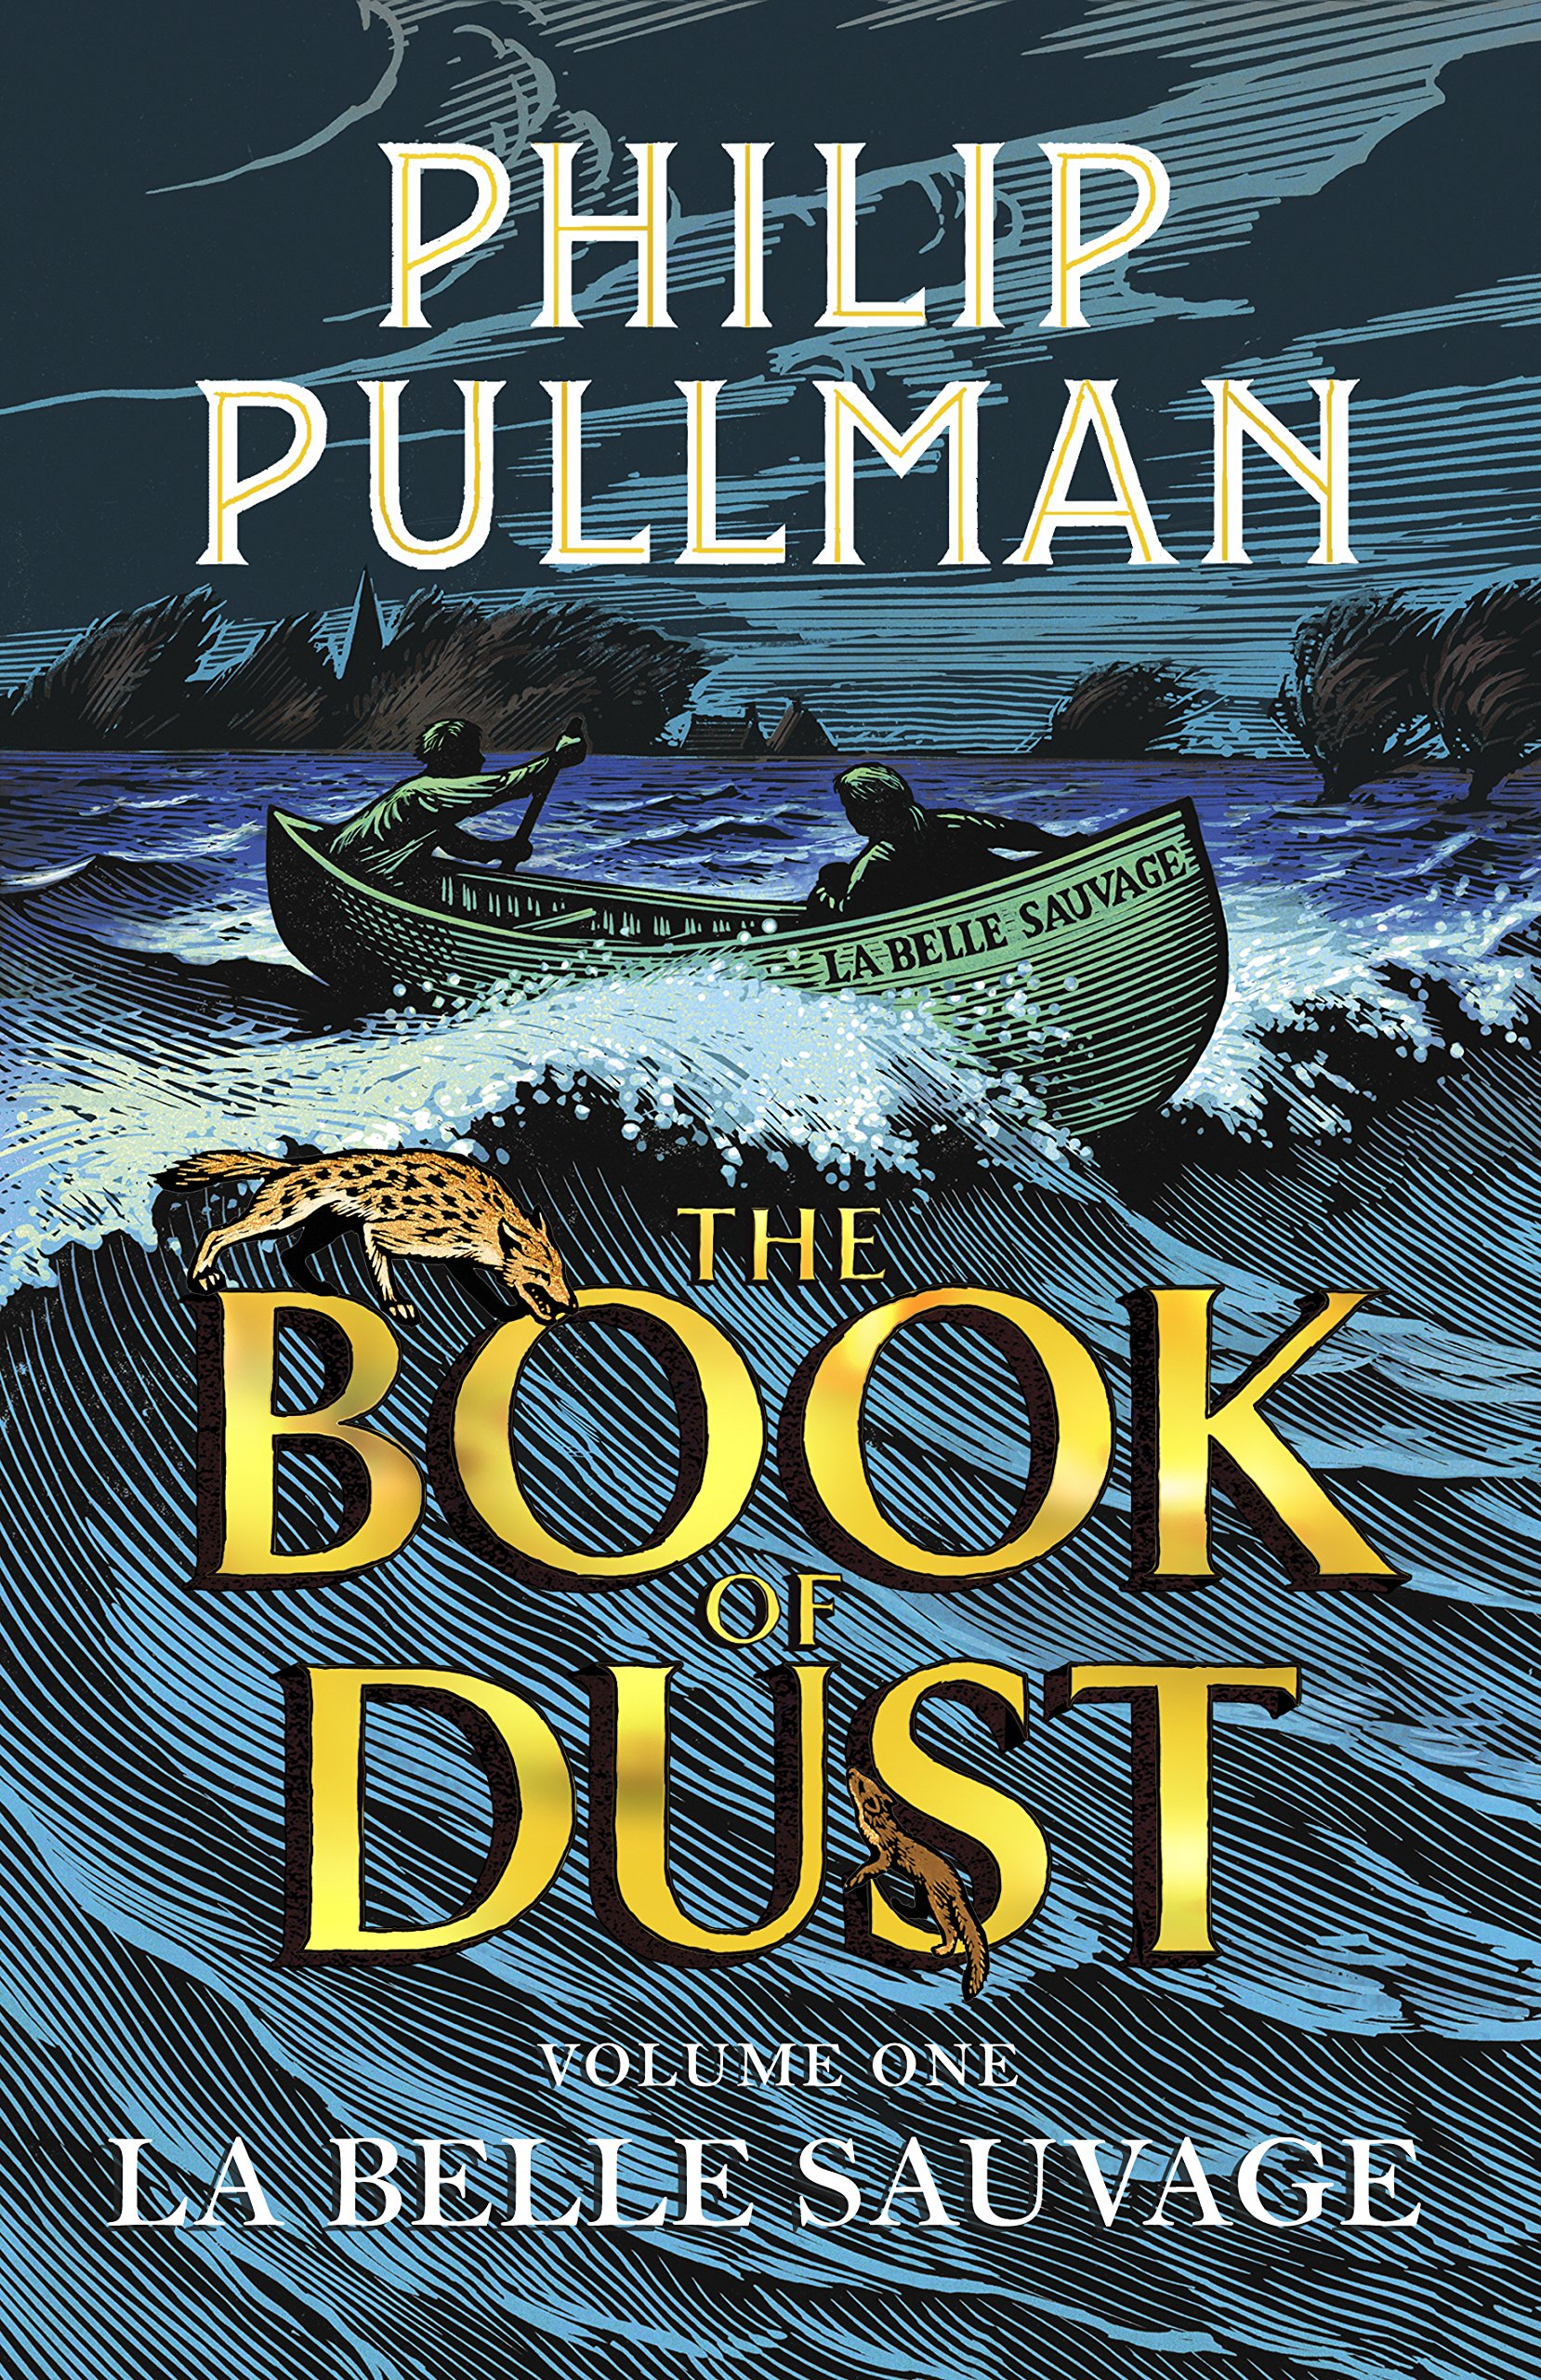 book of dust series